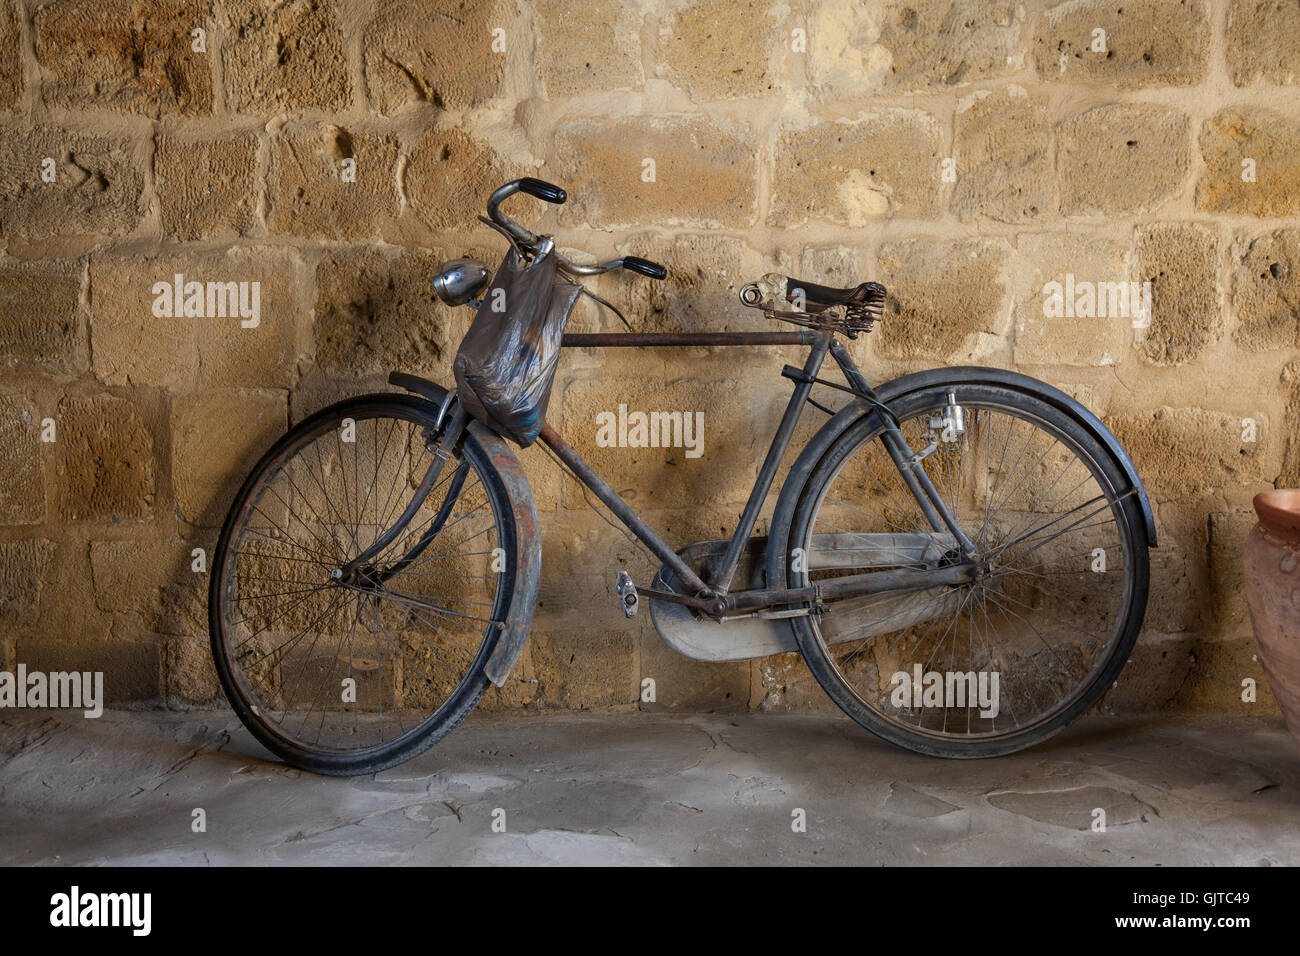 An old pedal bike leans against a stone wall. A bag hangs from the handlebars Stock Photo